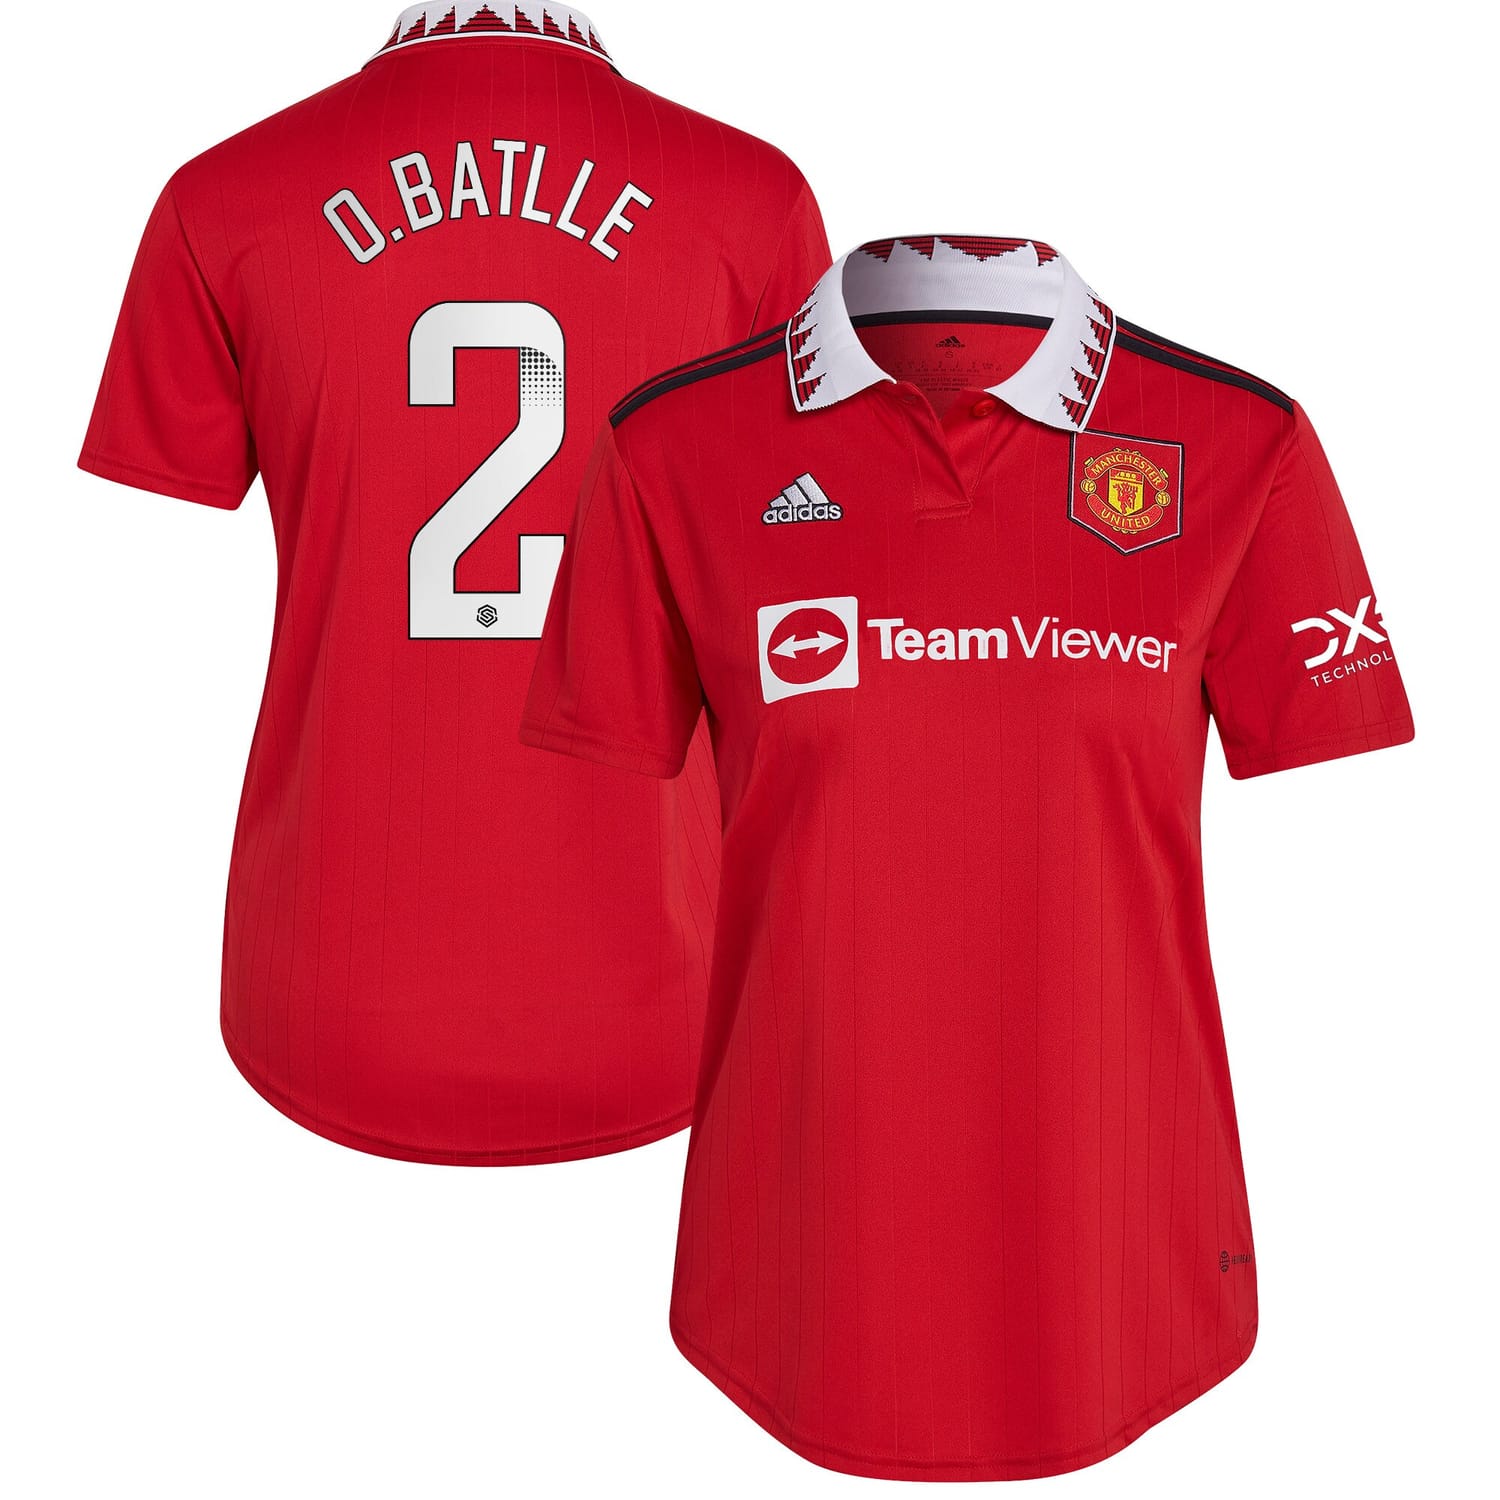 Premier League Manchester United Home WSL Jersey Shirt 2022-23 player Ona Batlle 2 printing for Women